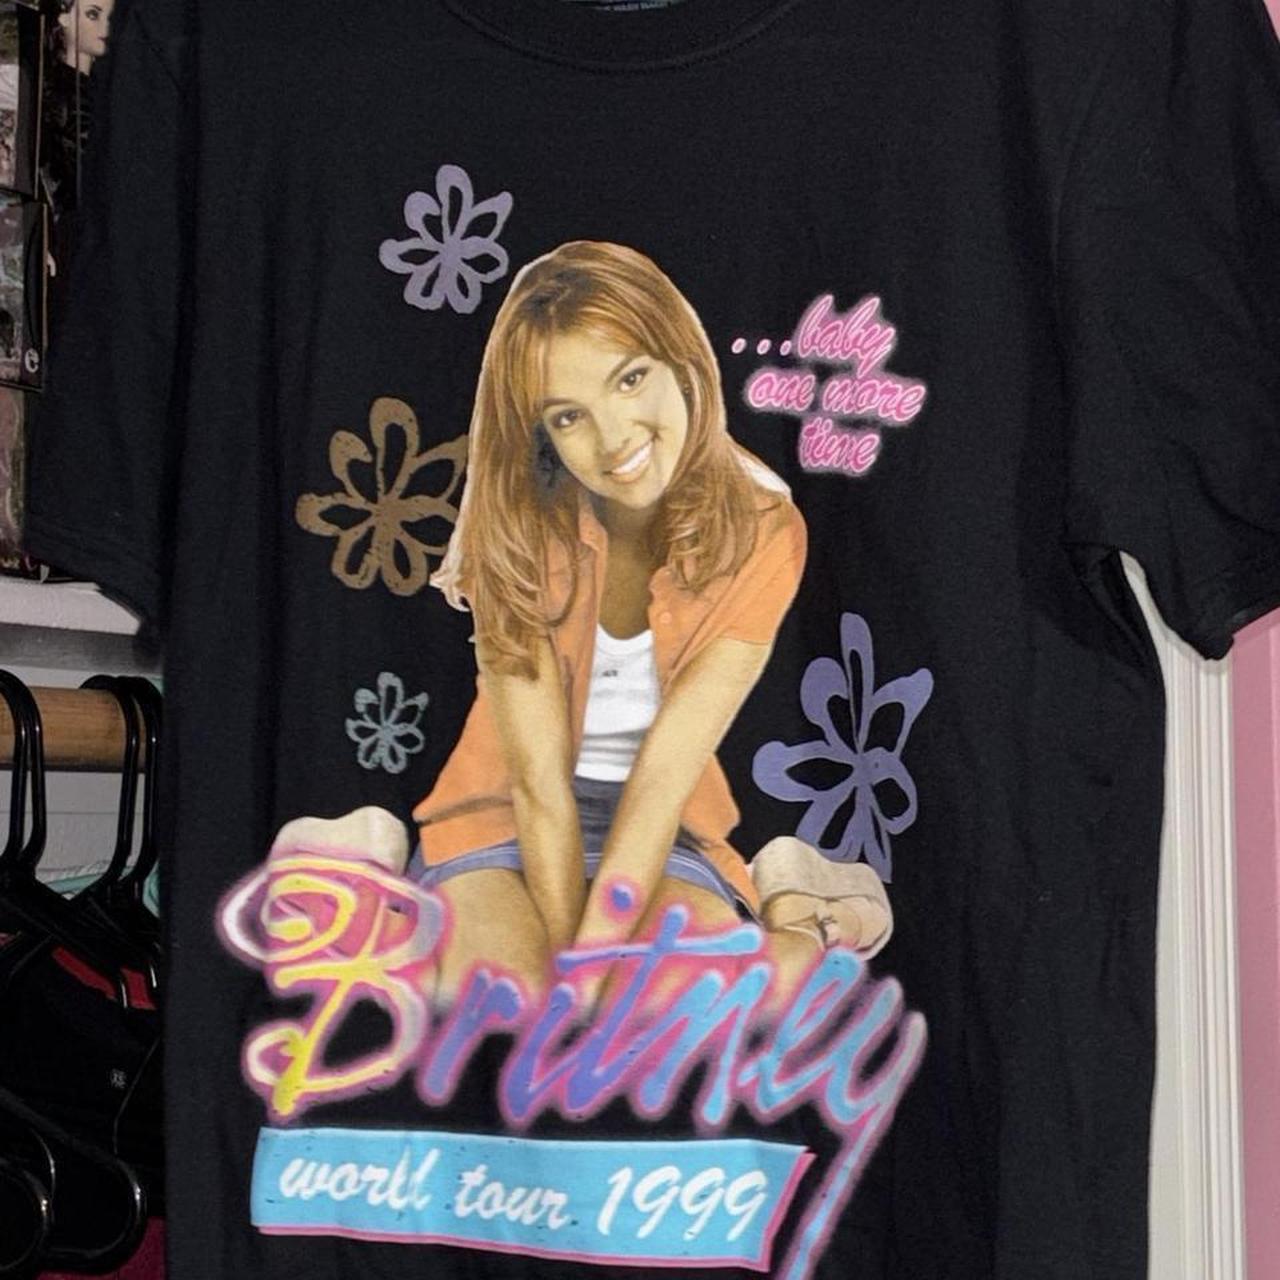 britney spears tour shirt super cute but too big for... - Depop